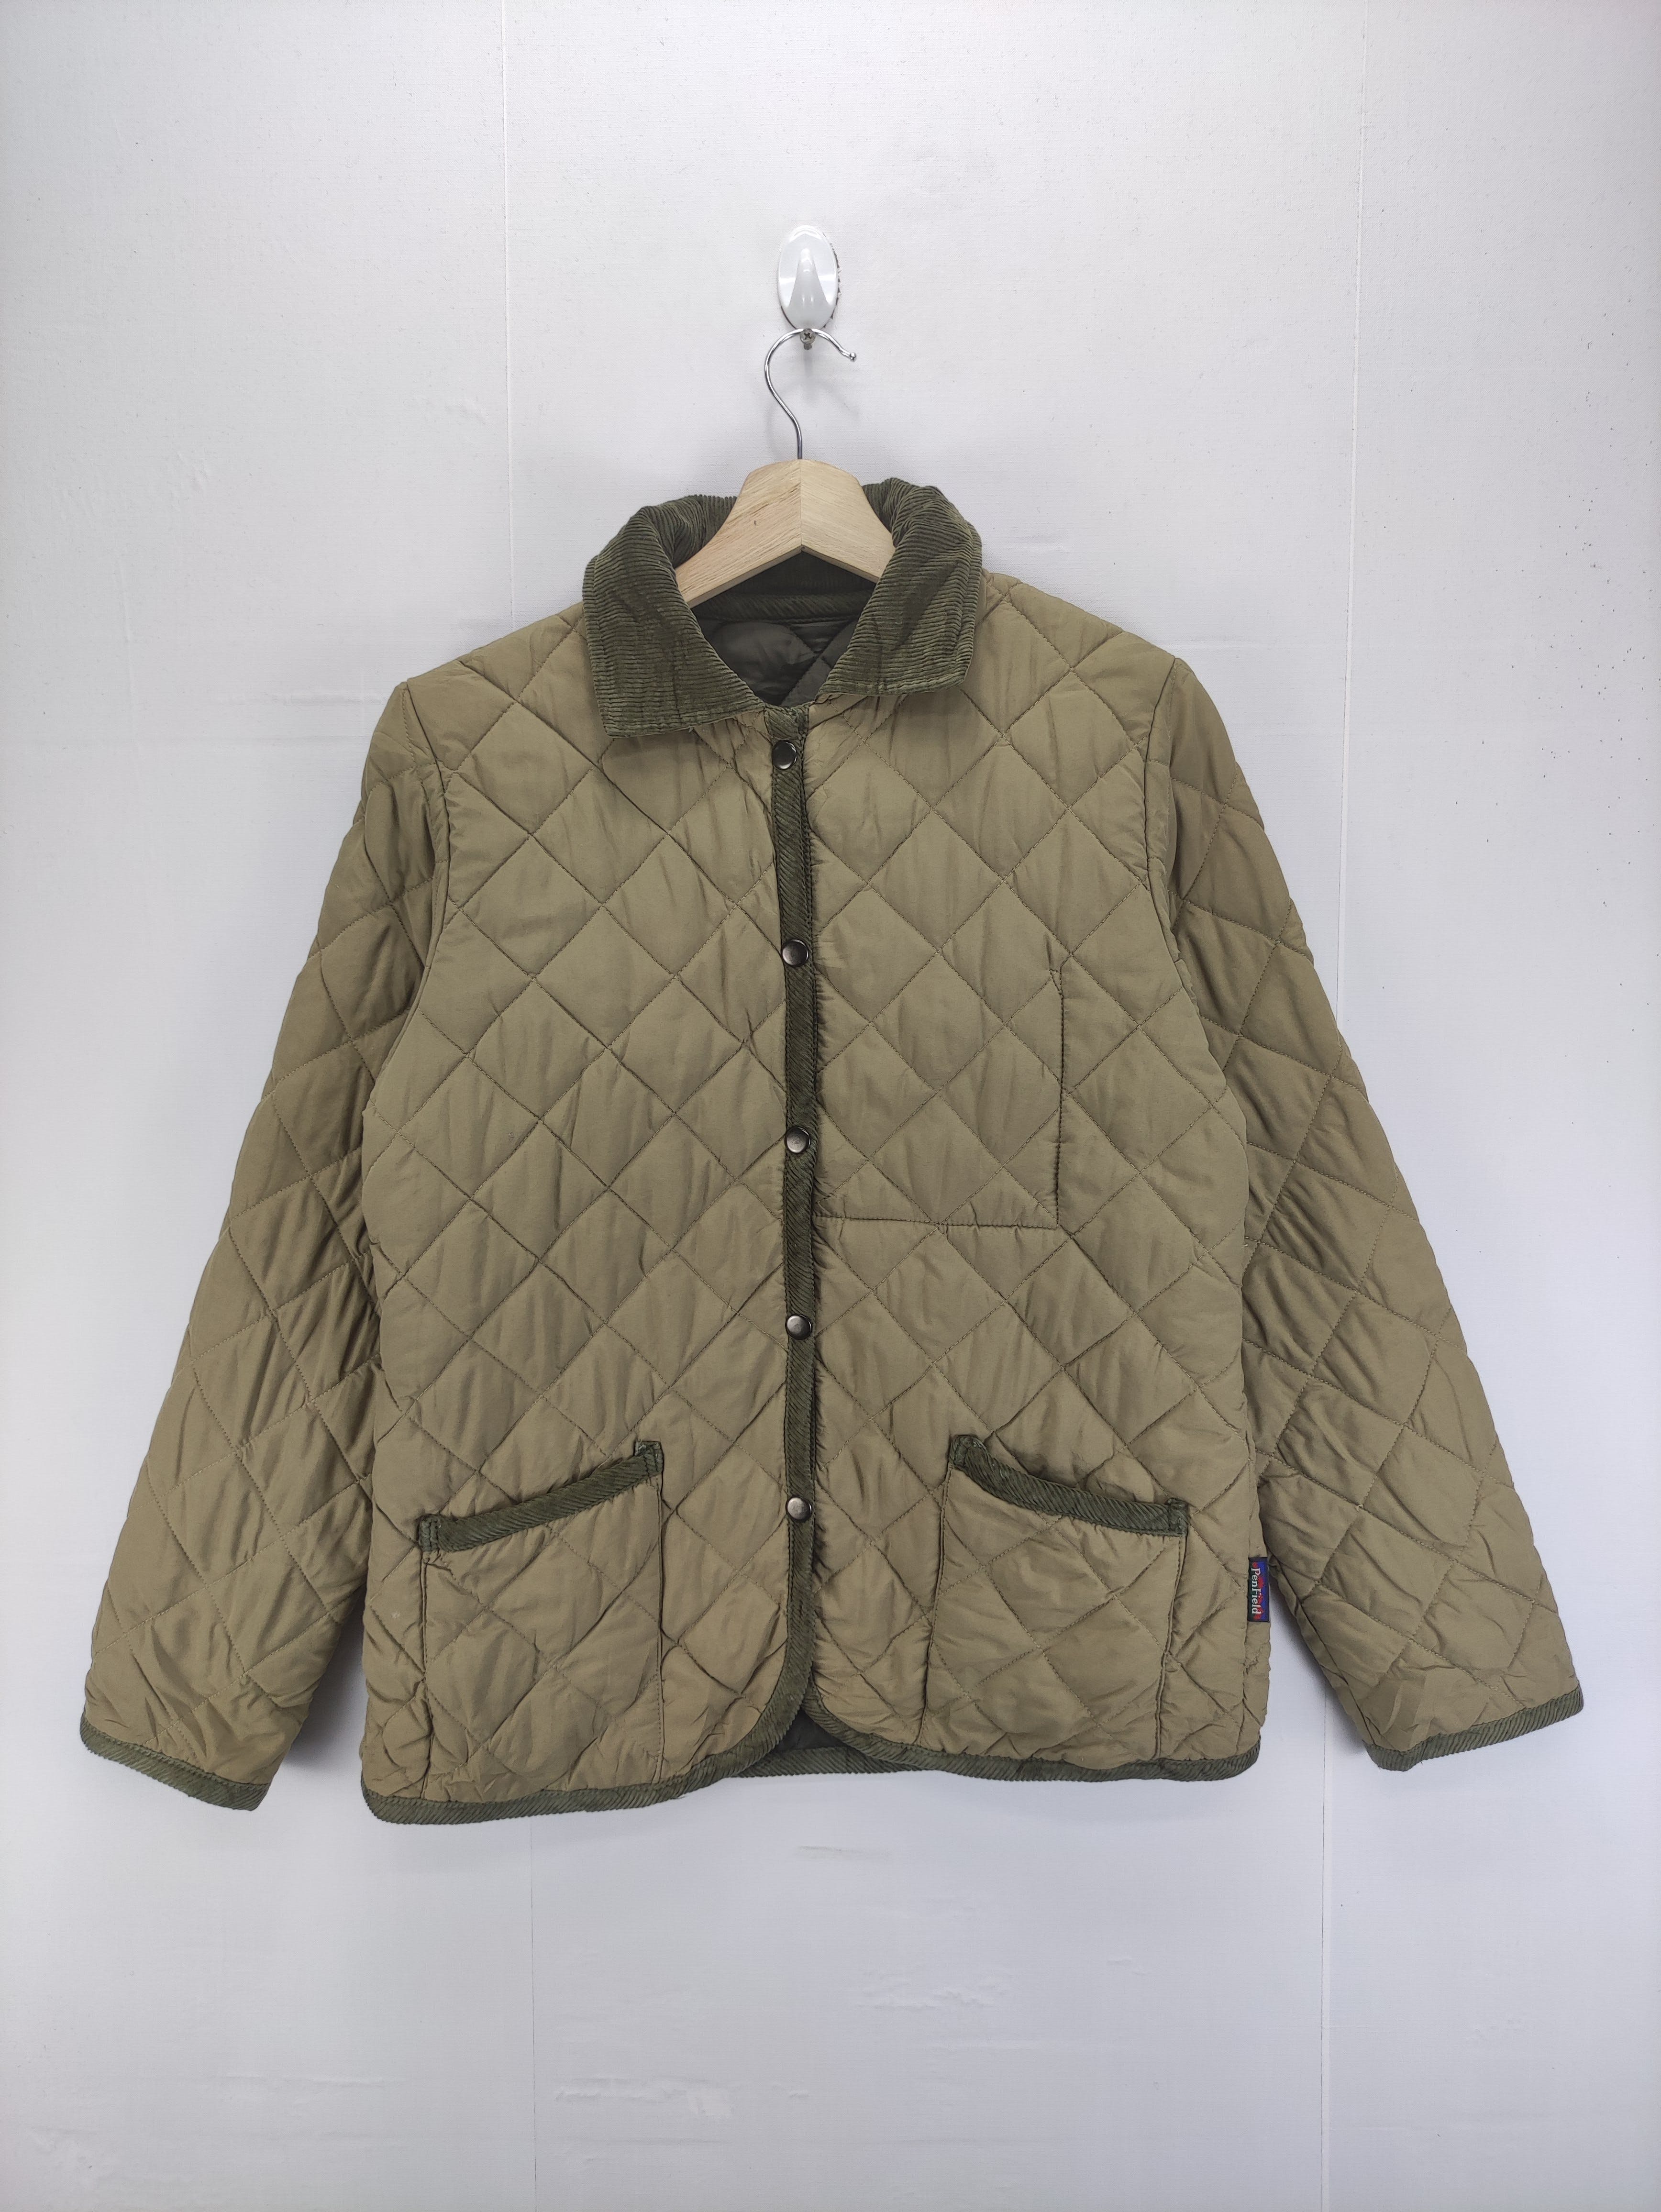 Vintage Penfield Quilted Jacket Snap Button - 1